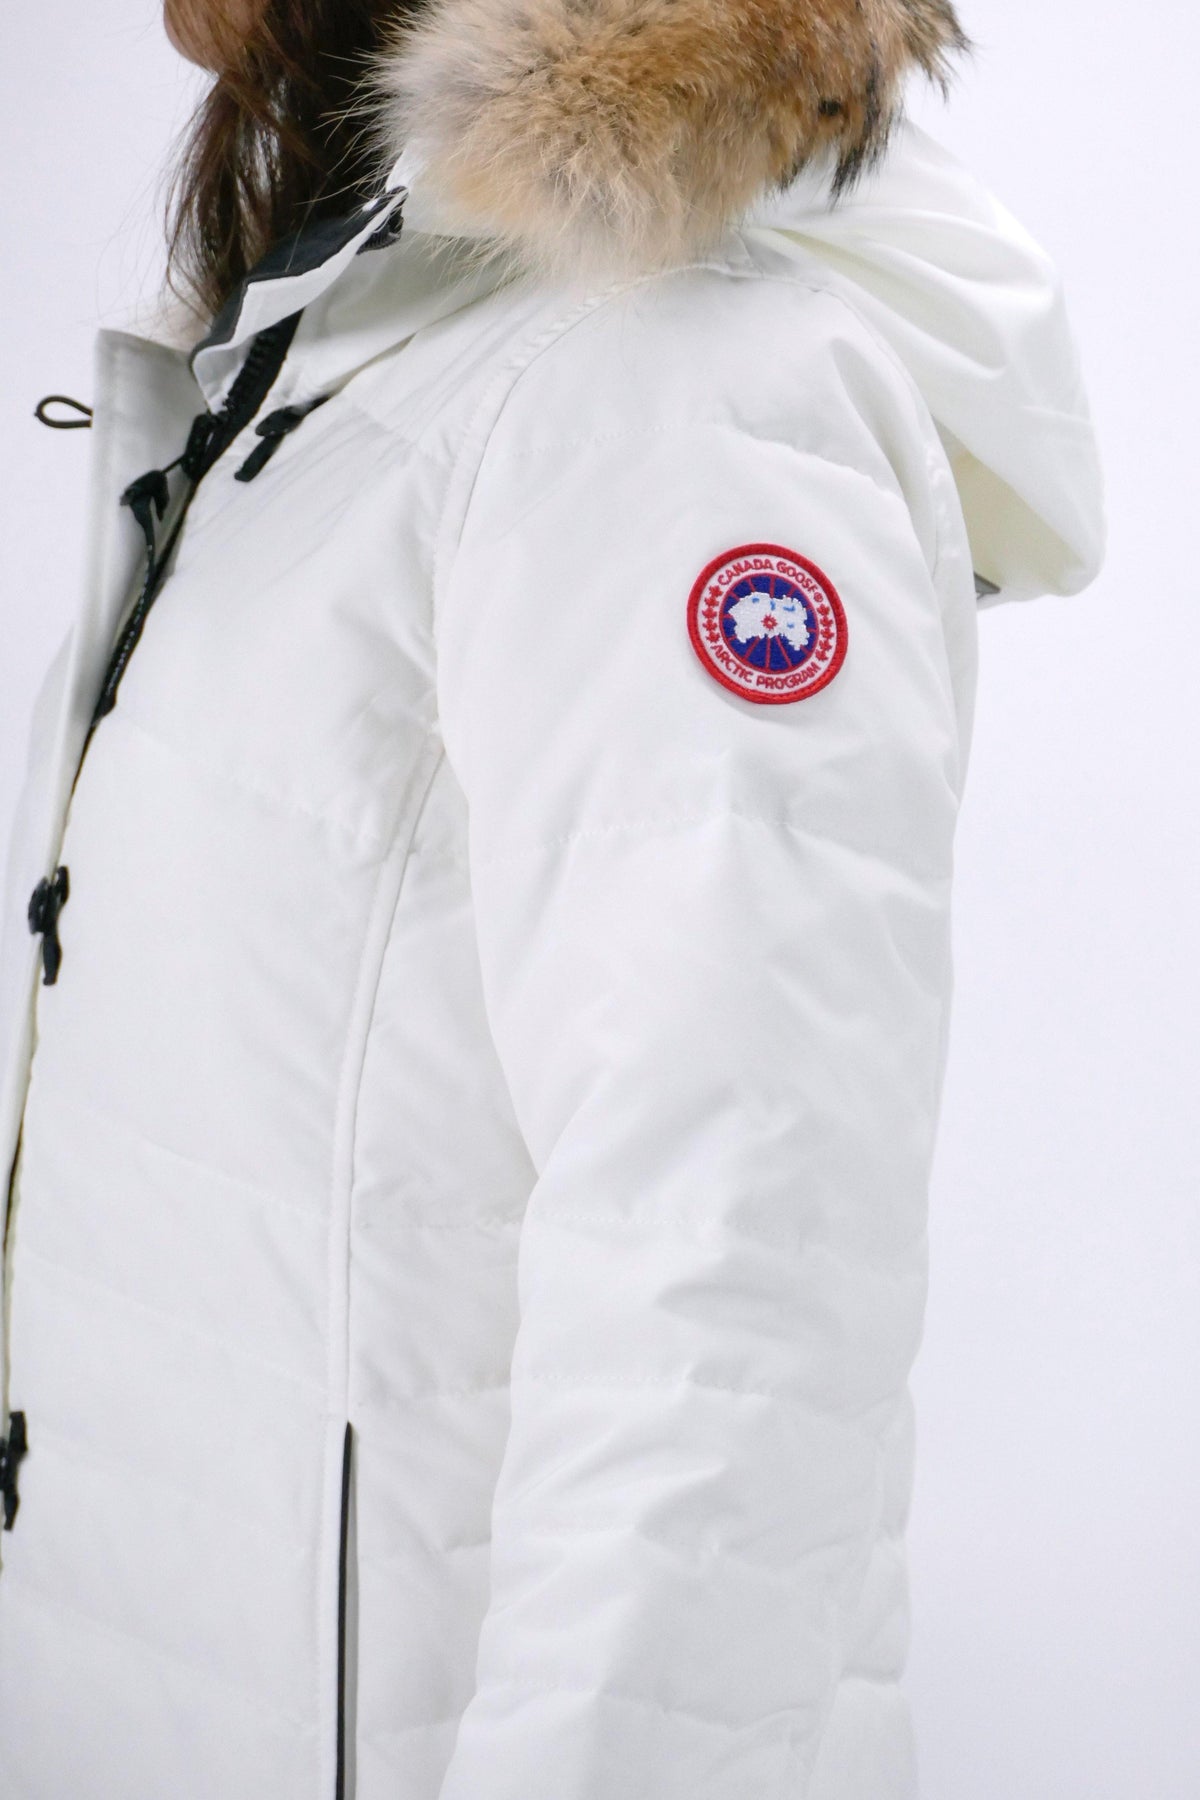 Canada Goose Womens Down *Parka Lorette  - North Star White - Due West